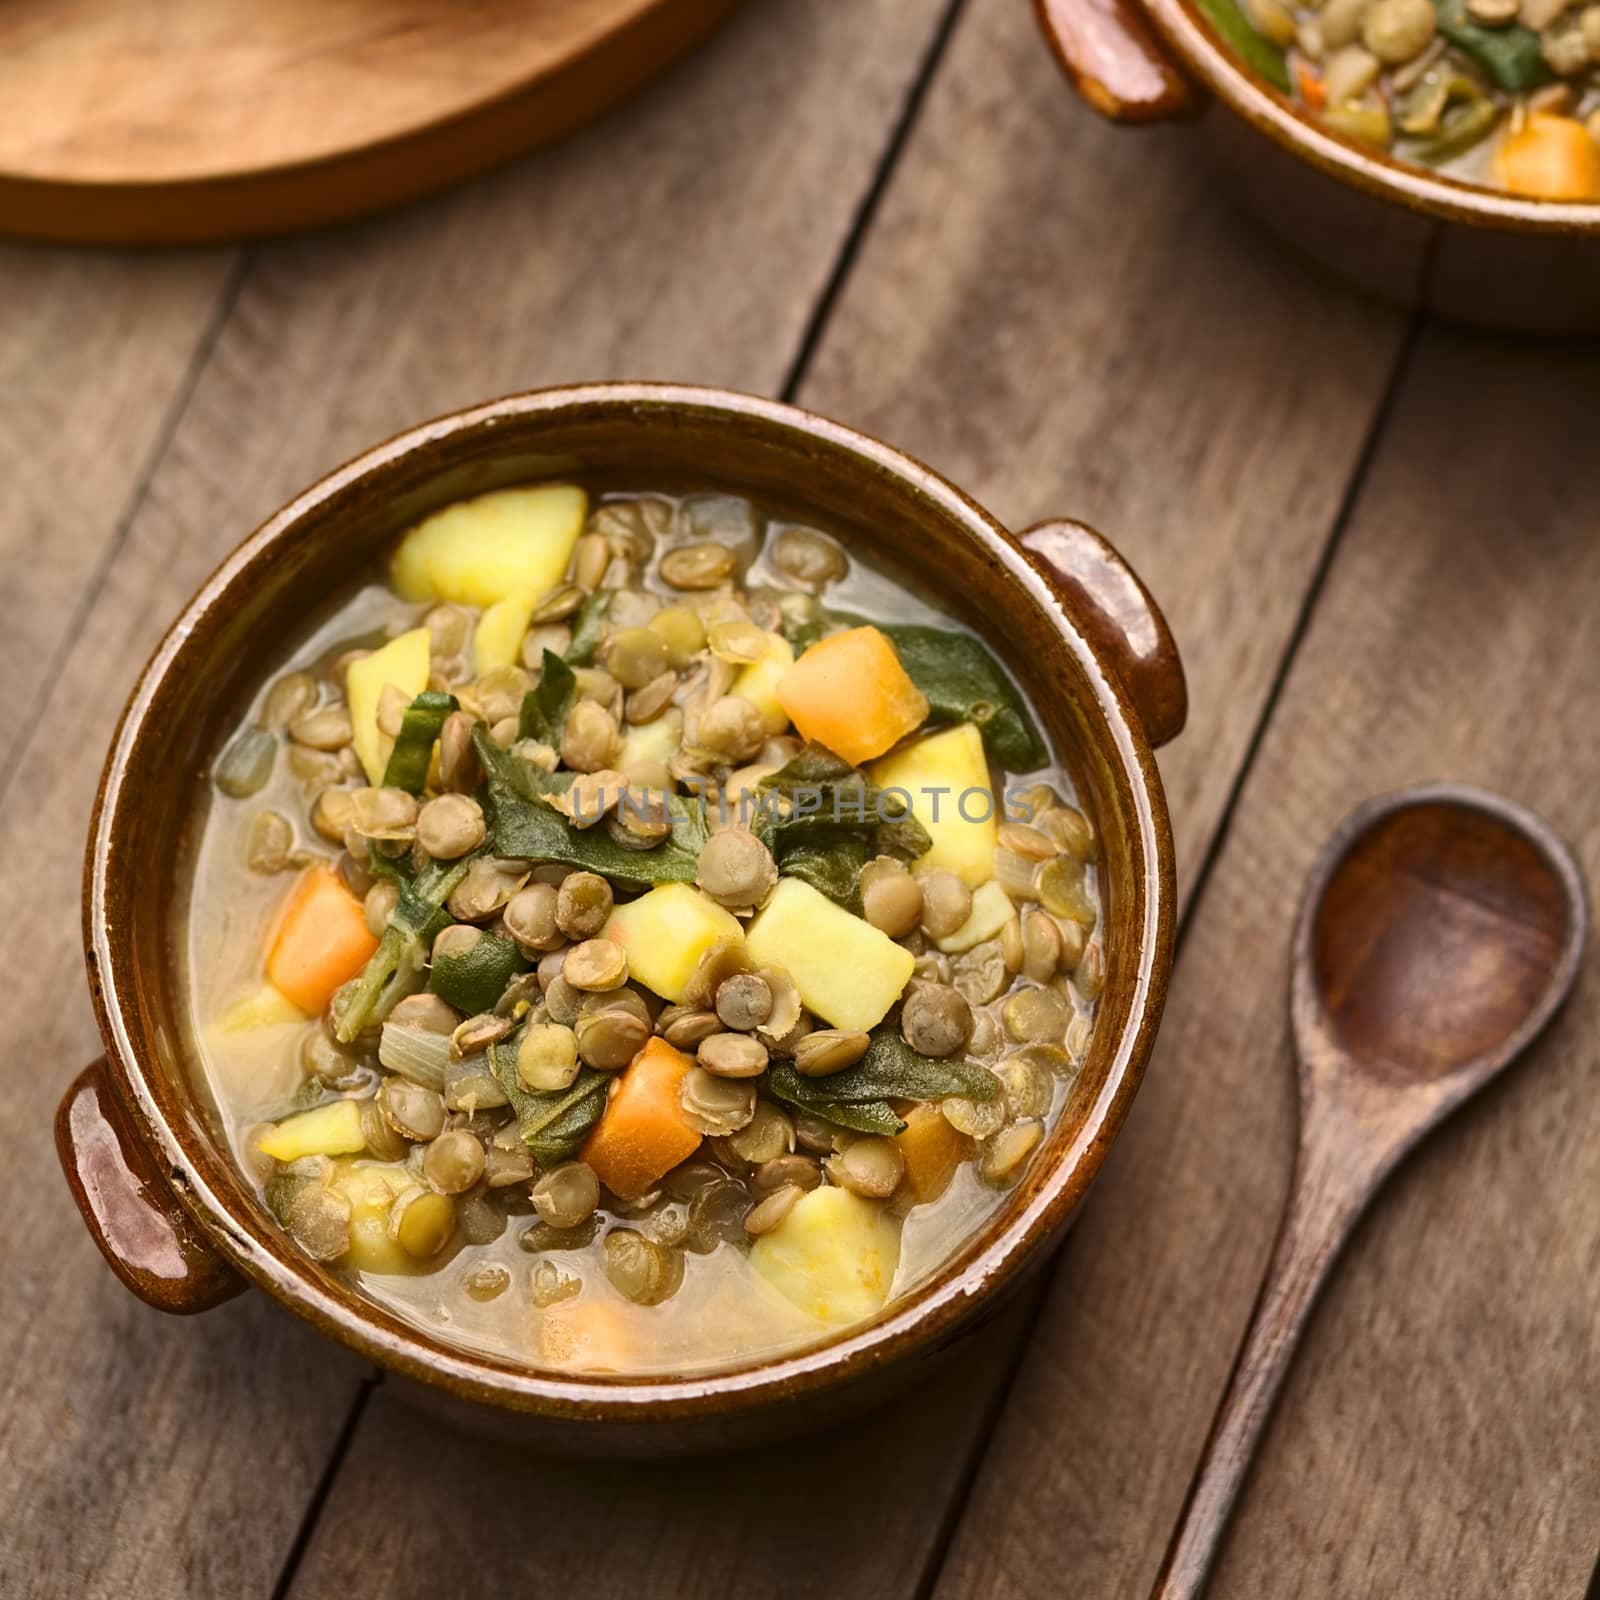 Lentil and Spinach Soup by ildi